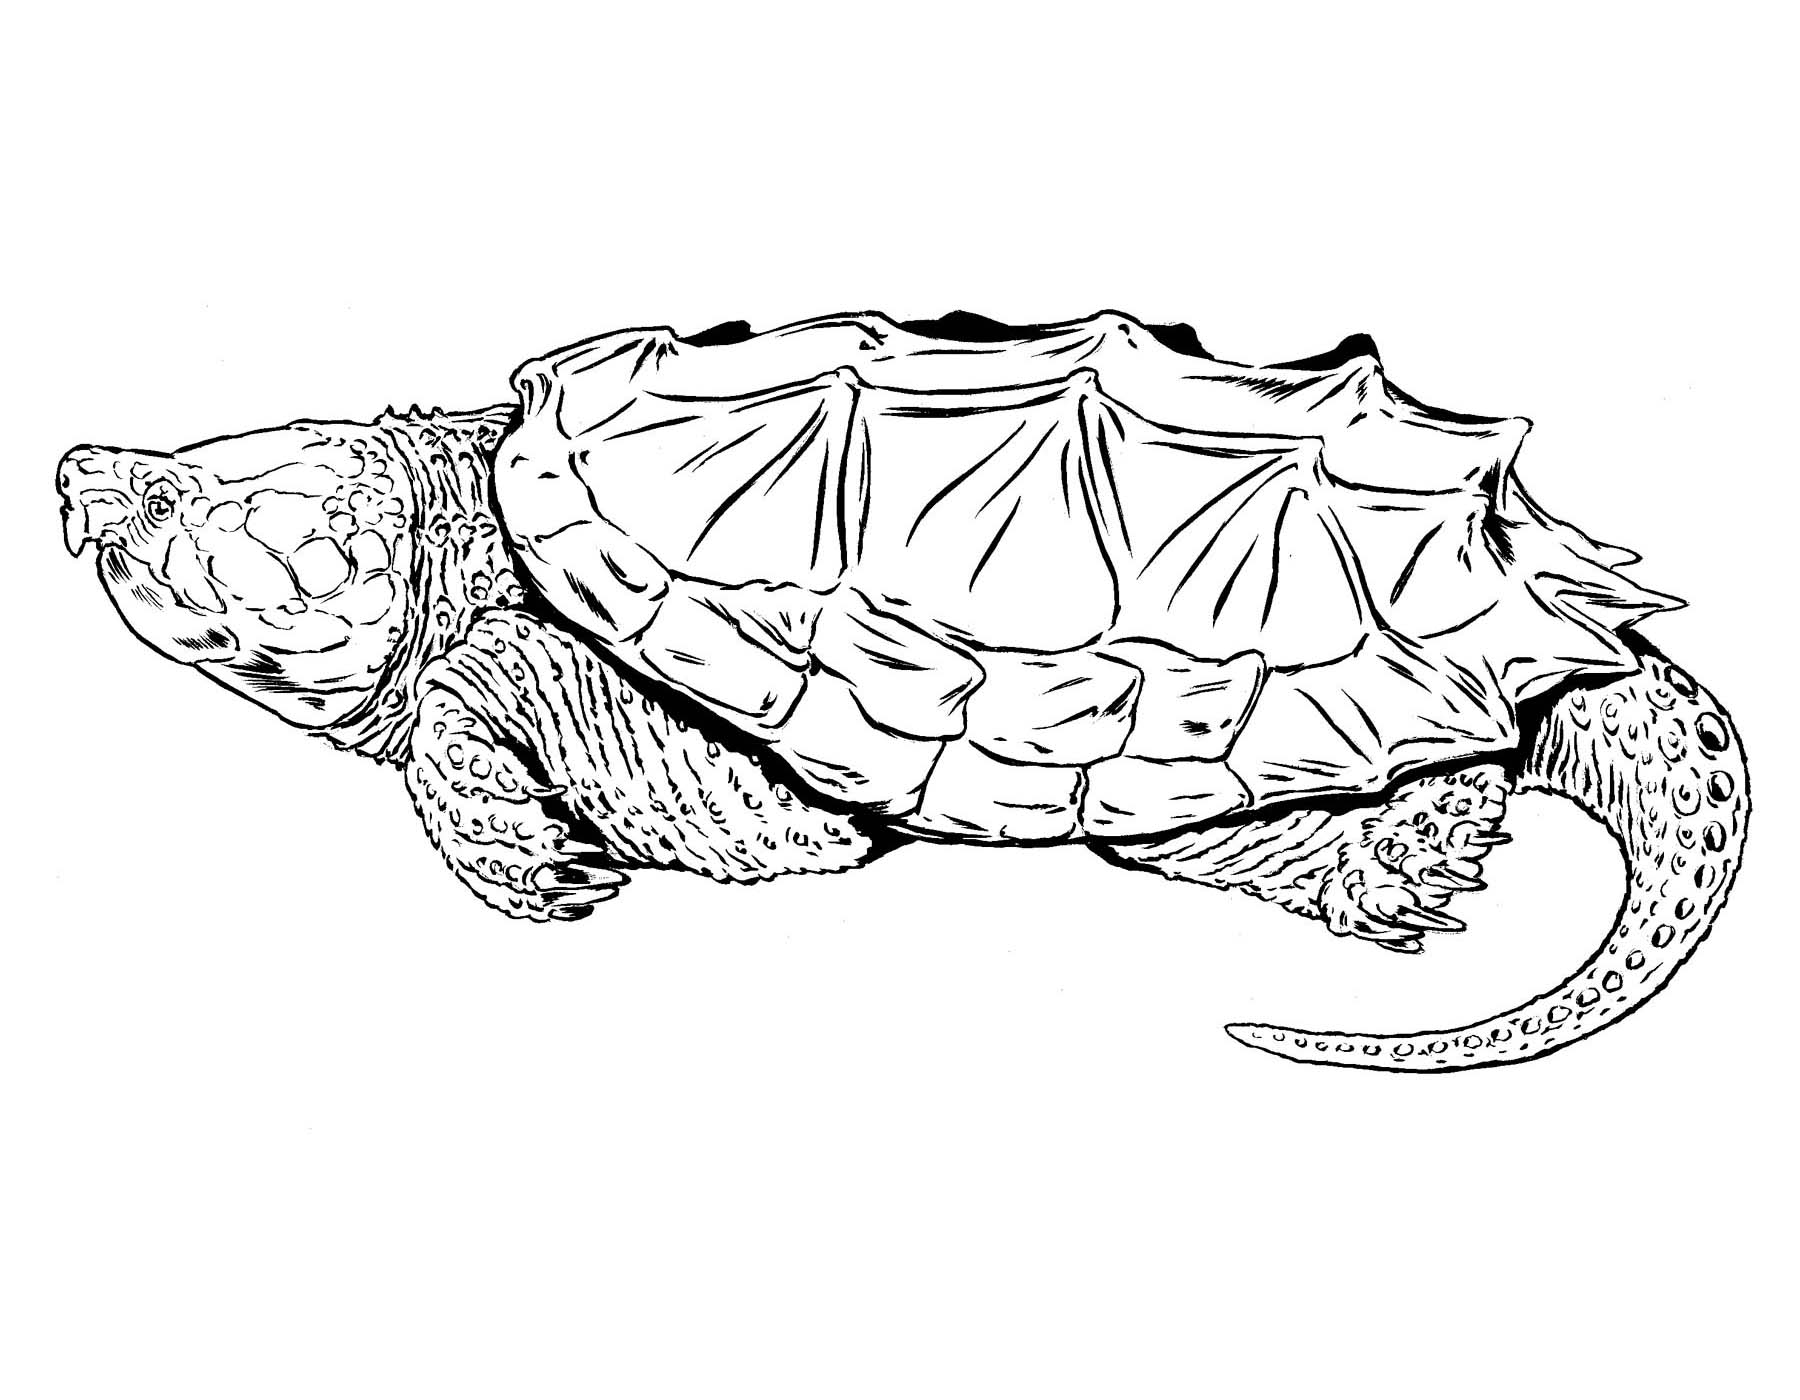 Alligator Snapping Turtle coloring #8, Download drawings